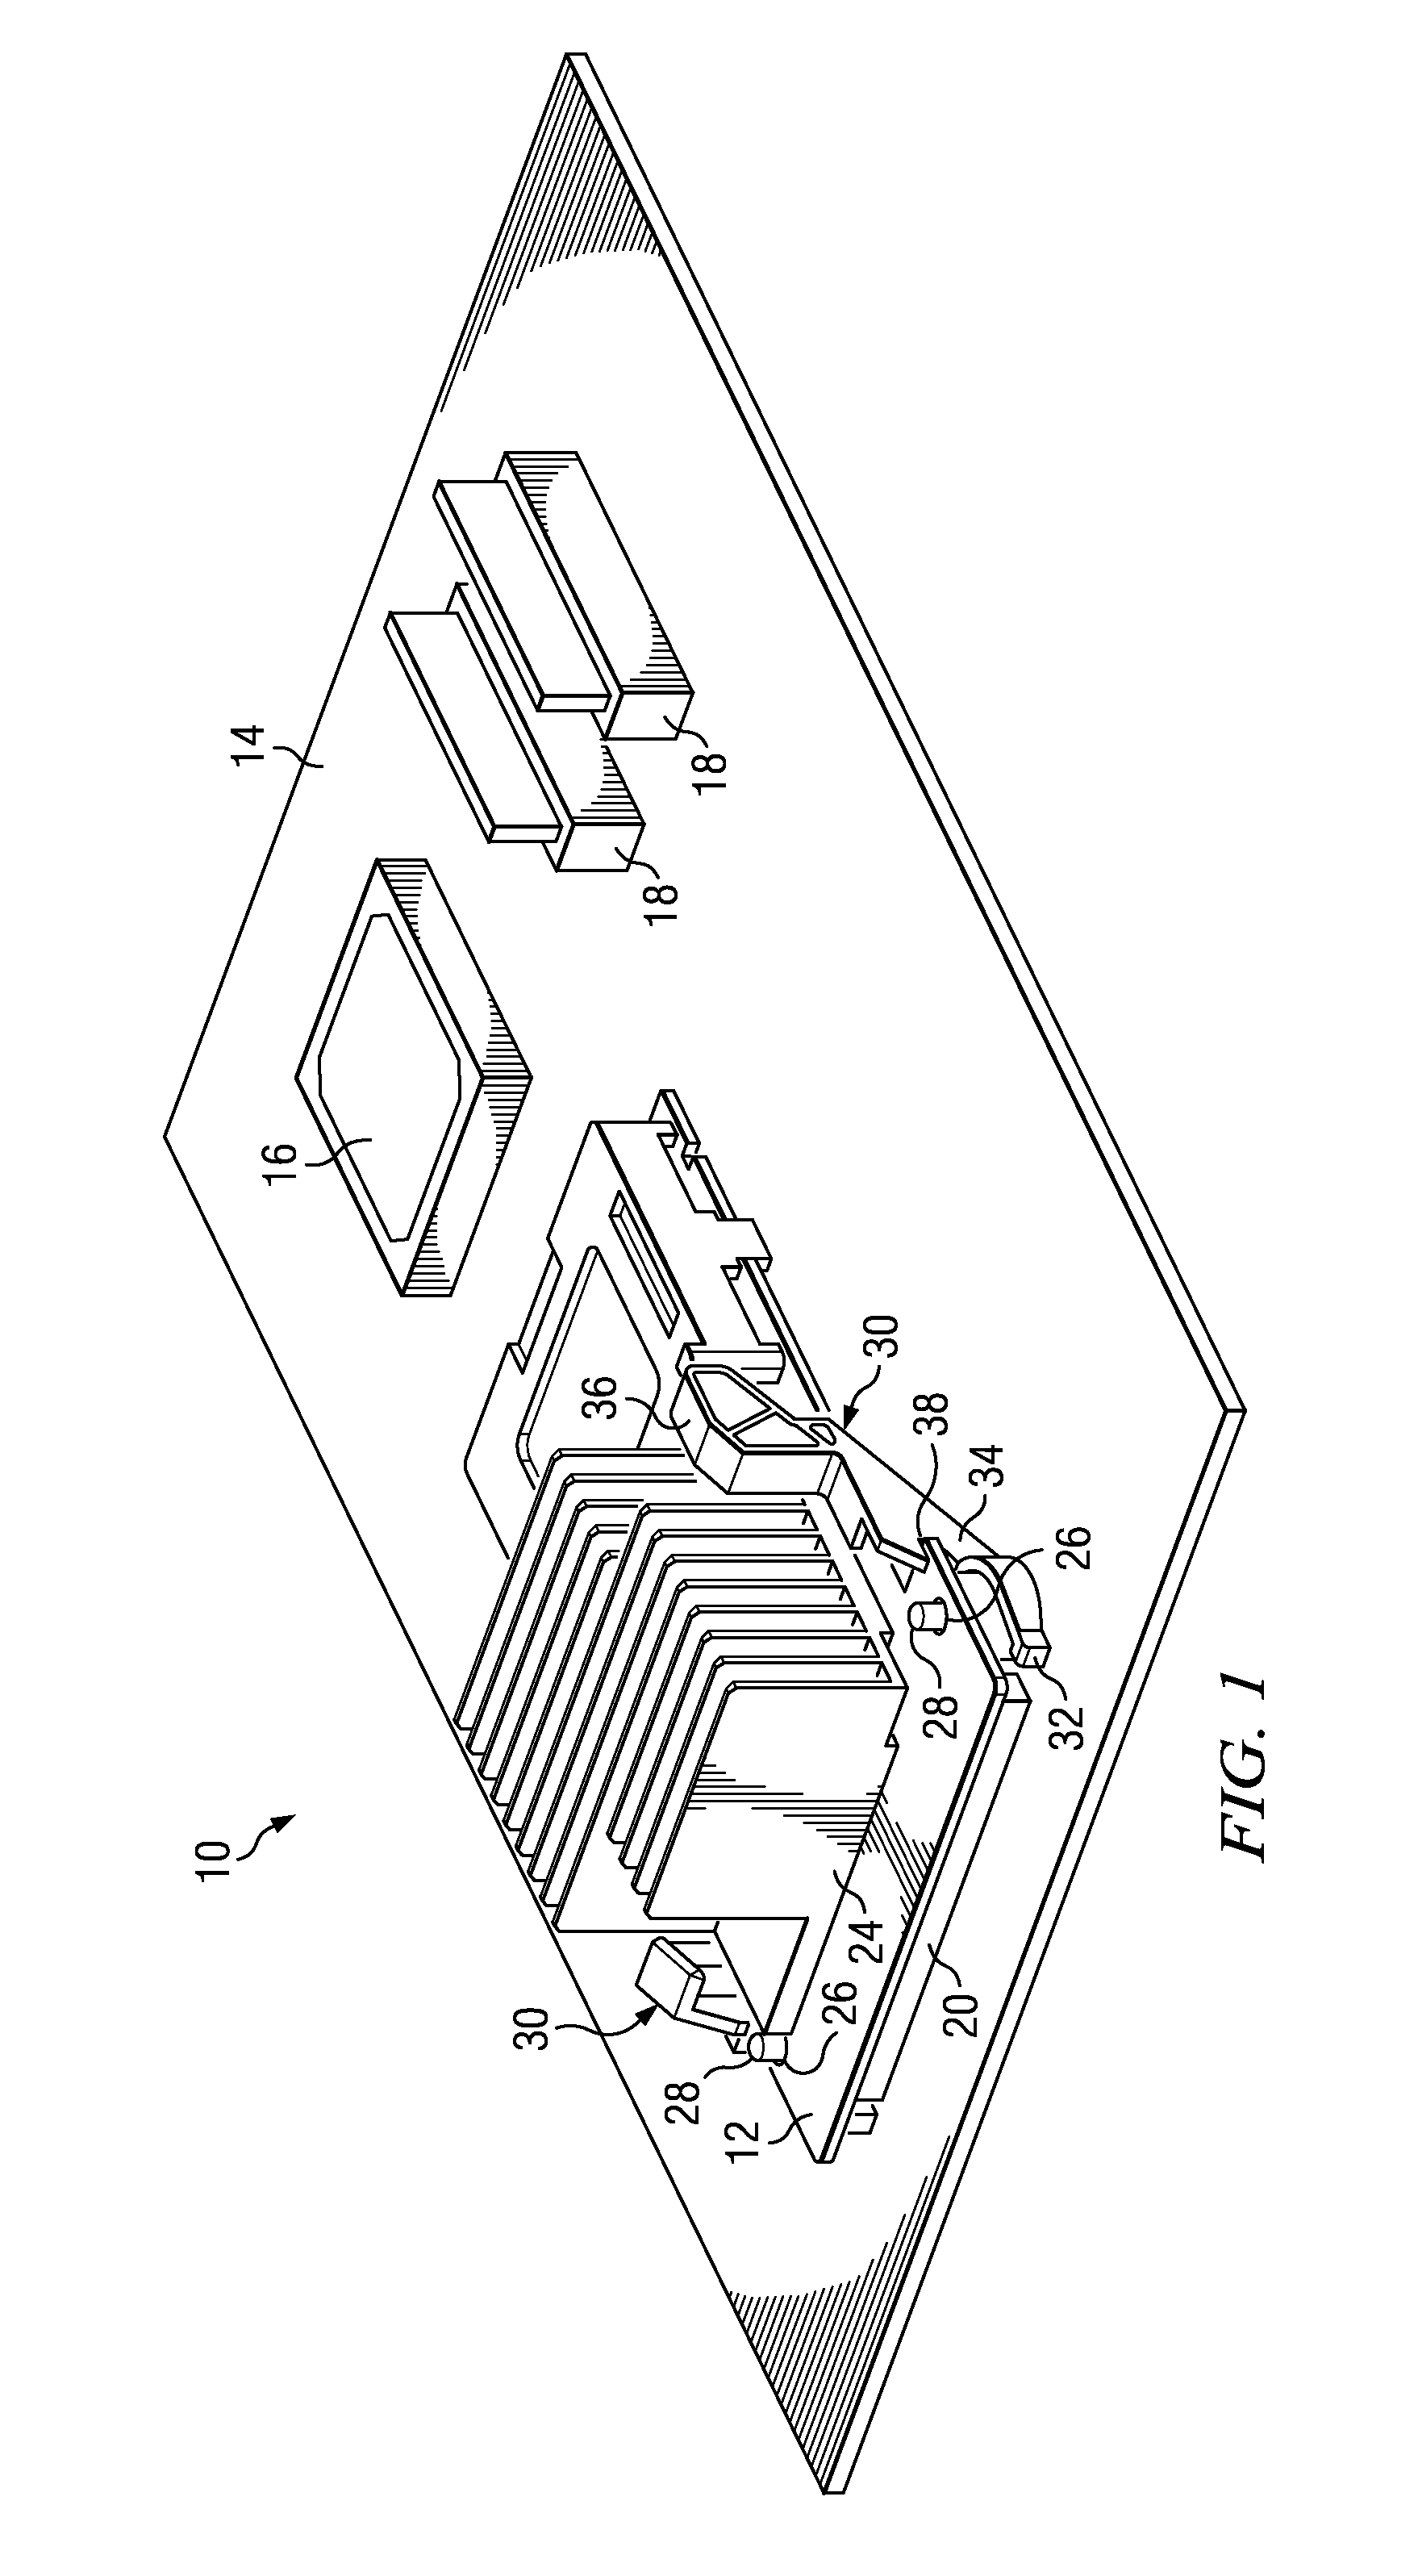 Retraction arm to extract a mezzanine circuit board connector from a motherboard connector